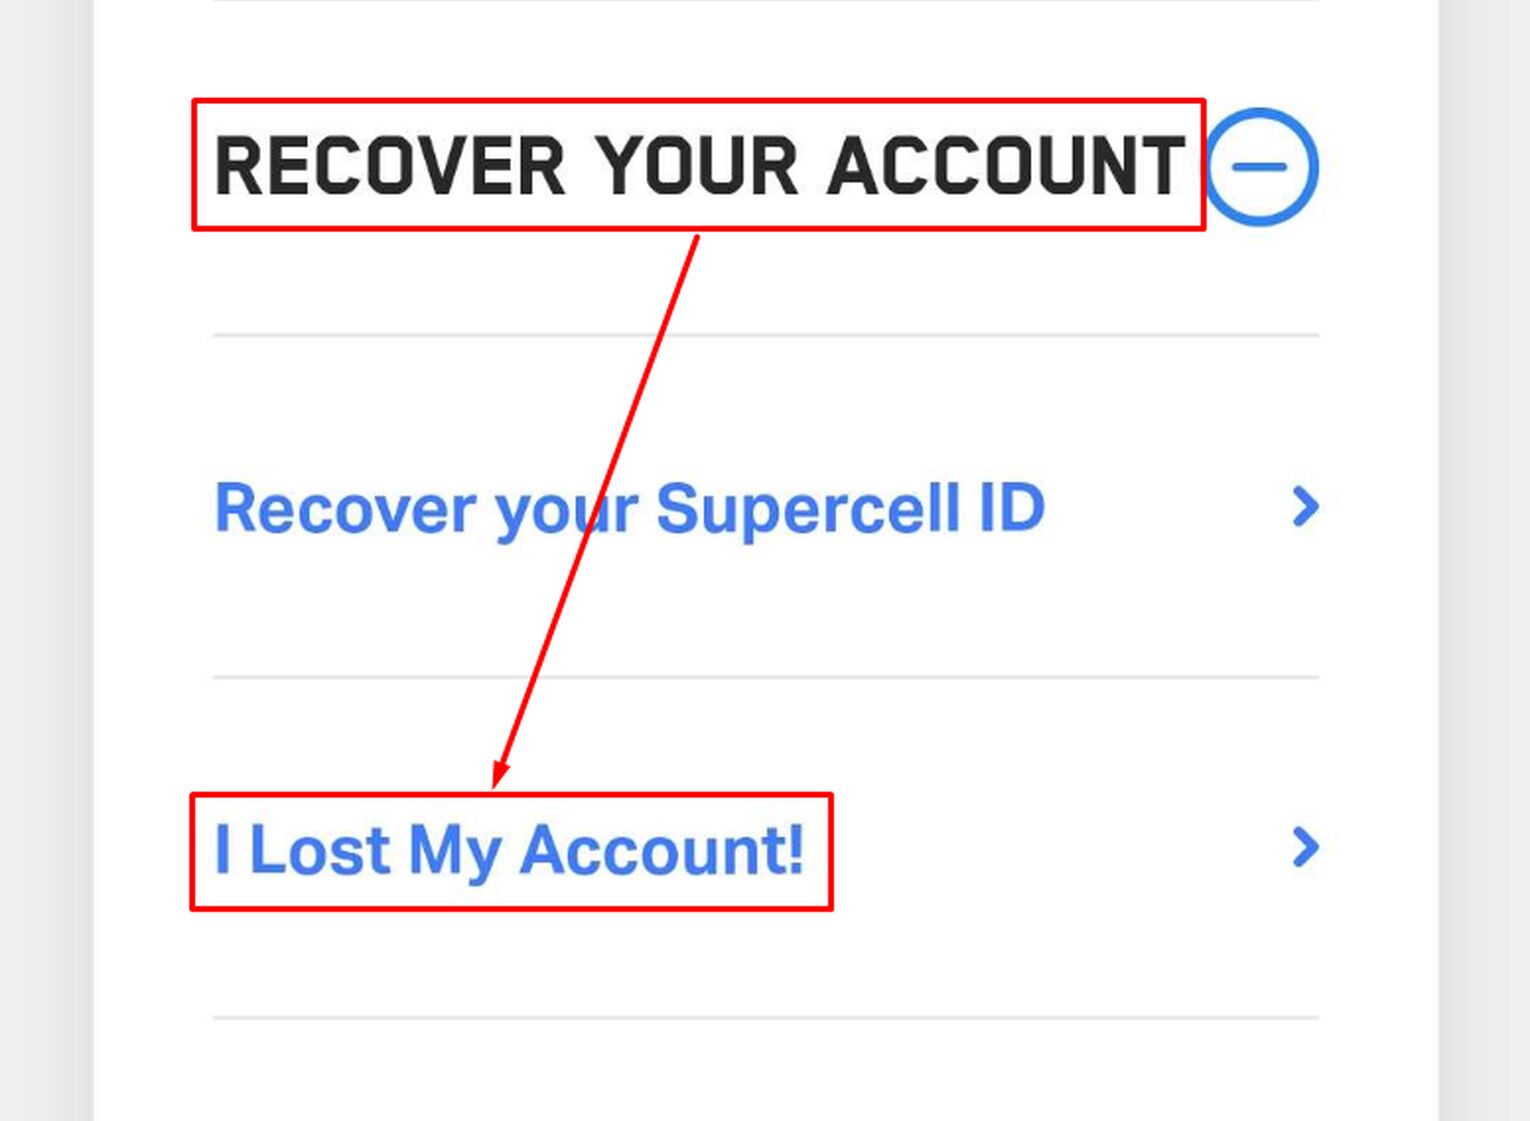 Head Over To “I Lost My Account”